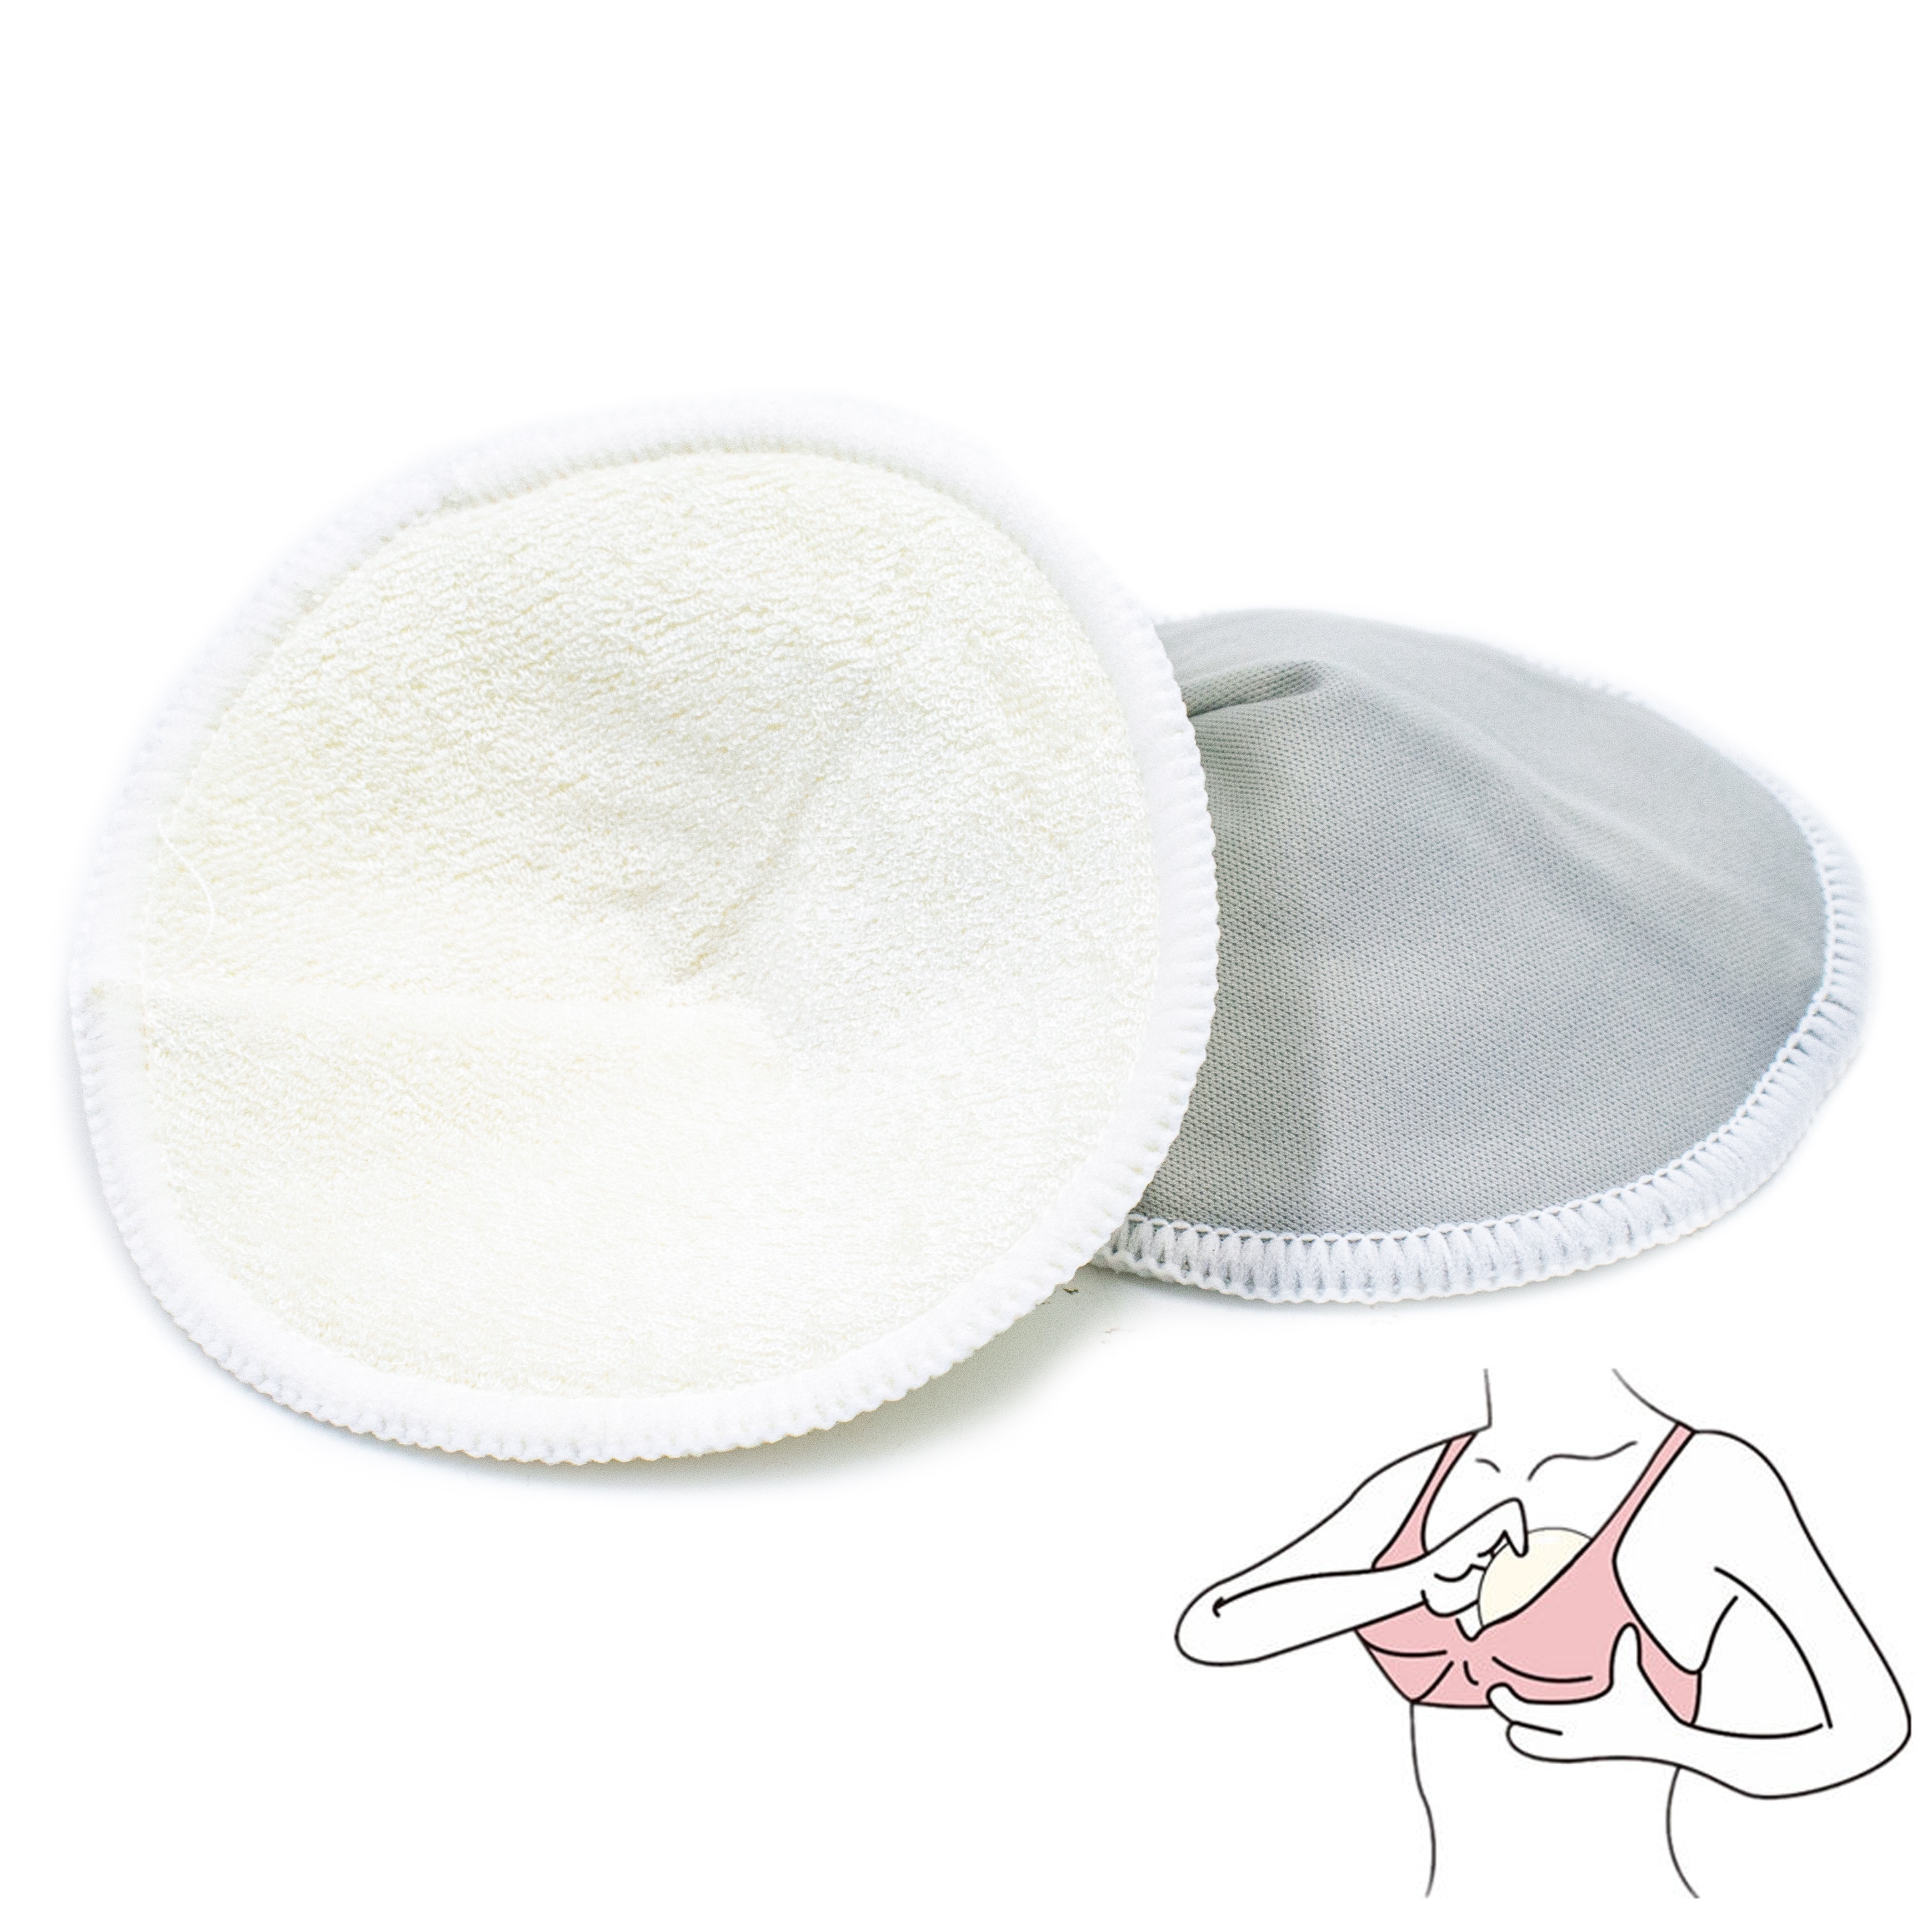 Pur Washable Breast Pads - 4pcs - 9833 : Pur